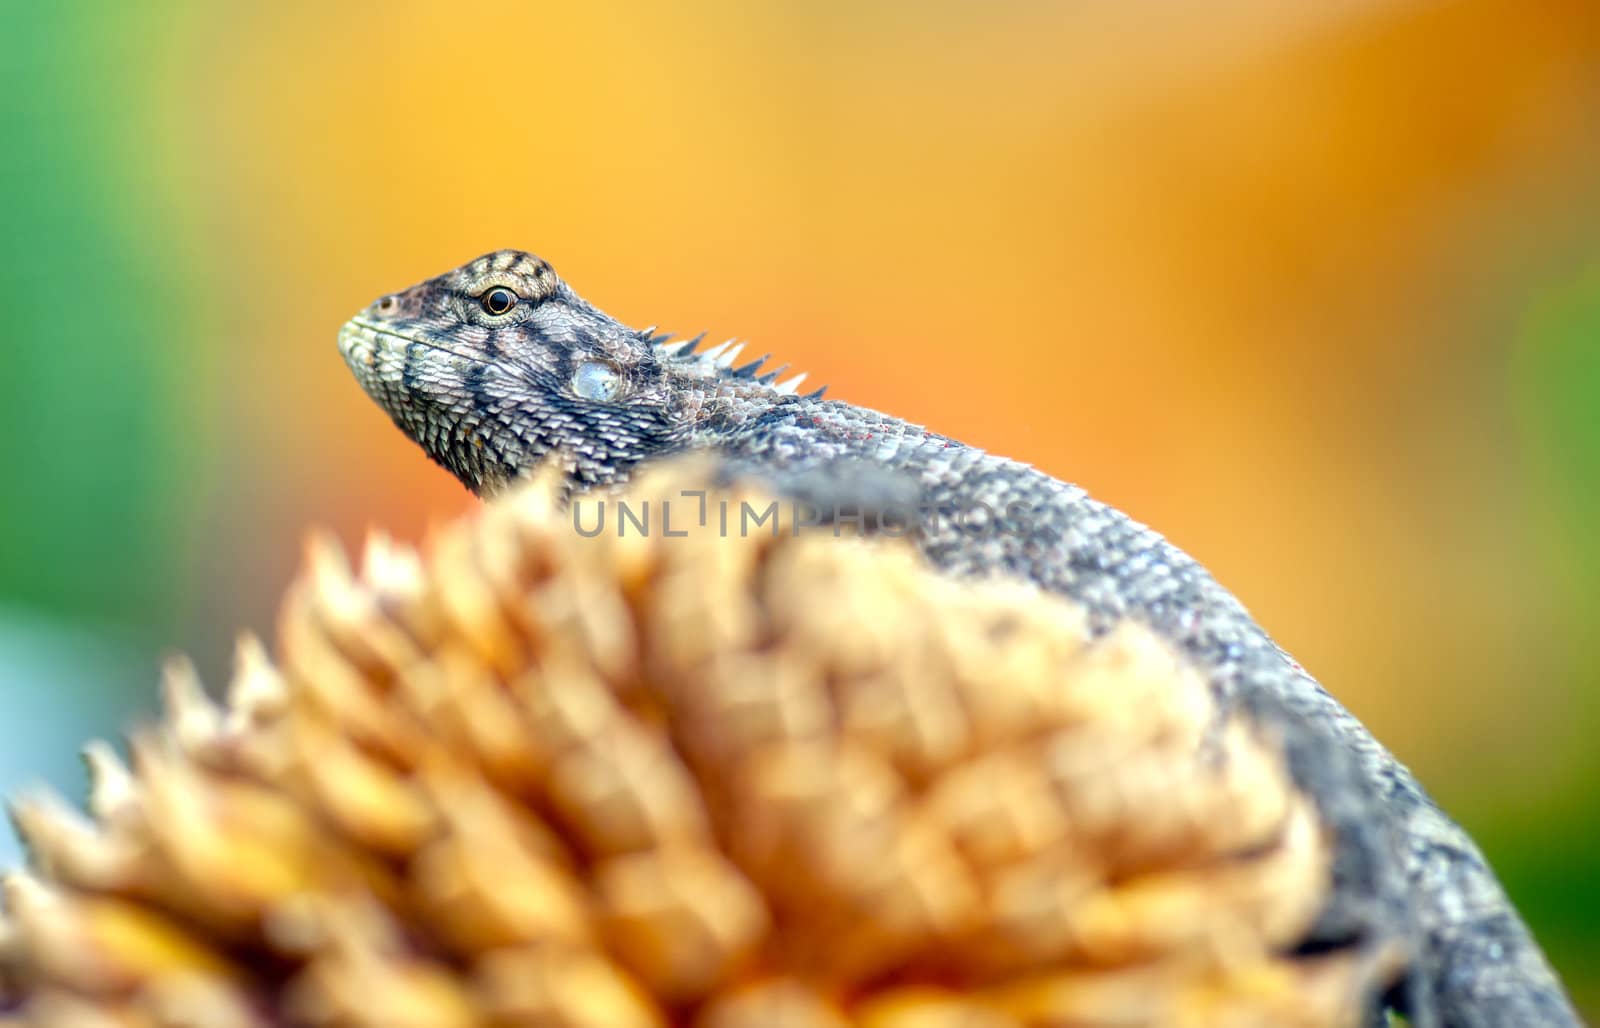 A lizard in the nature by xfdly5